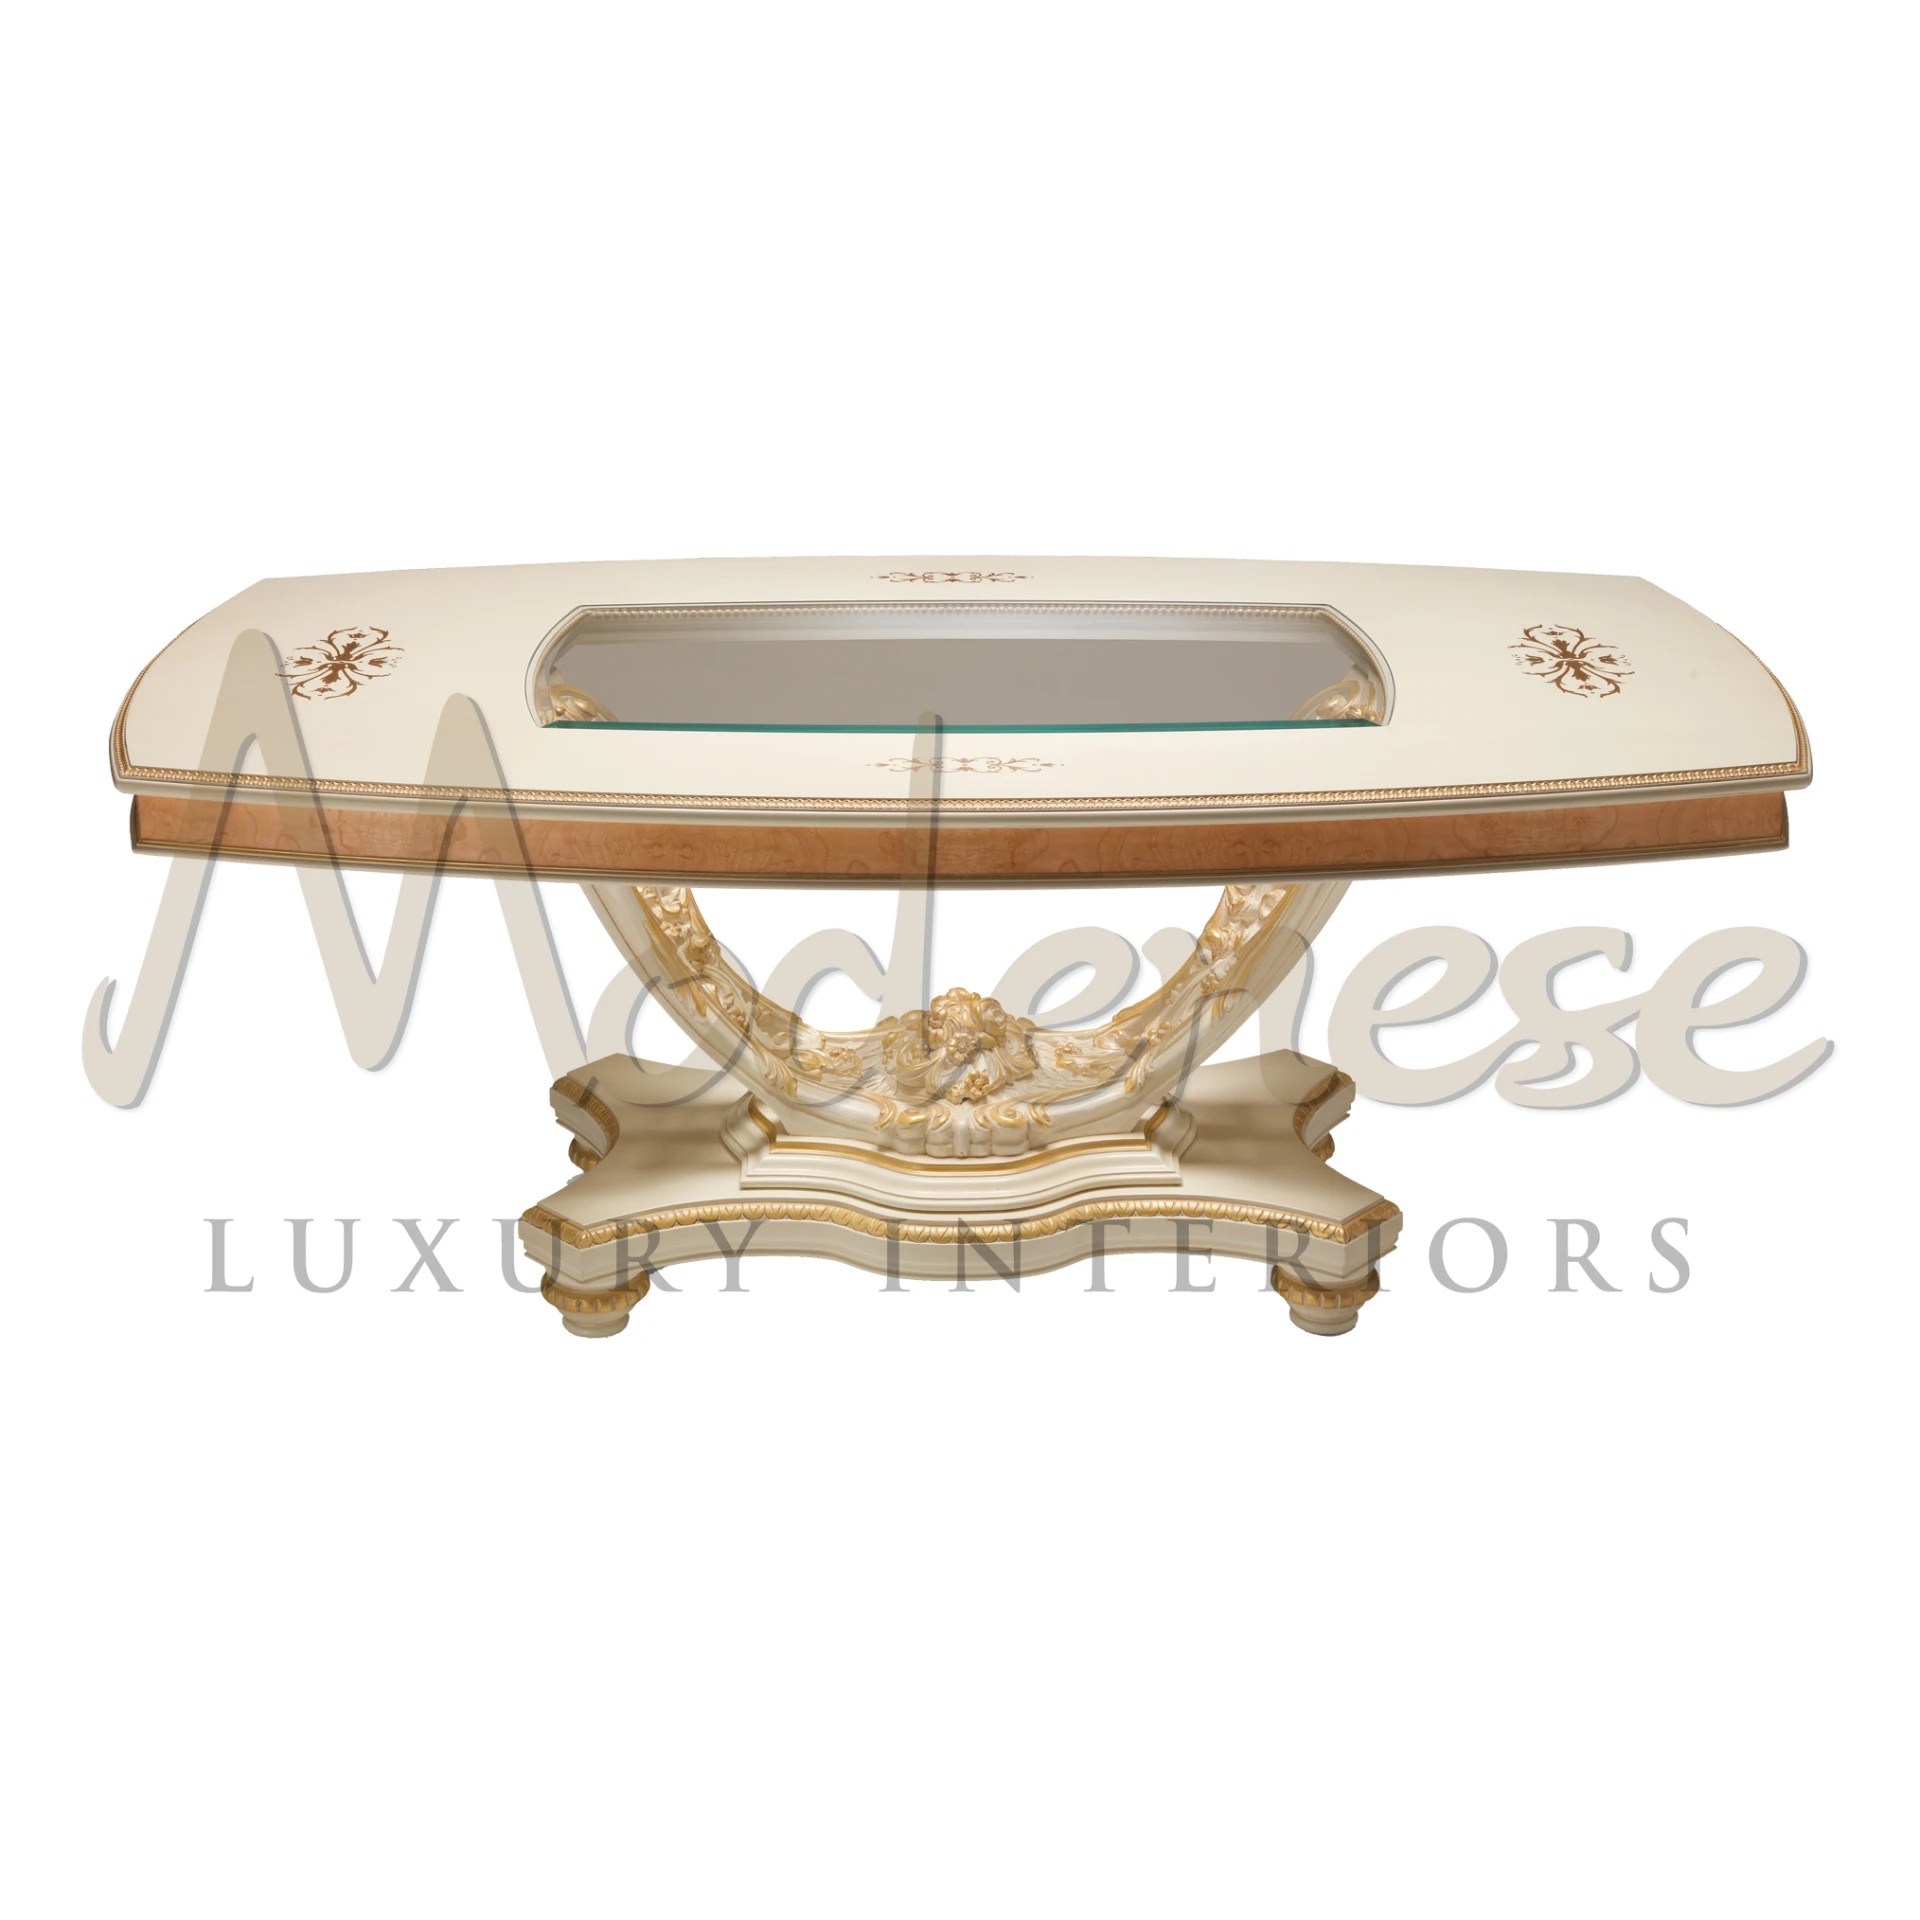 Luxurious French rectangular dining table with glass top and carved details